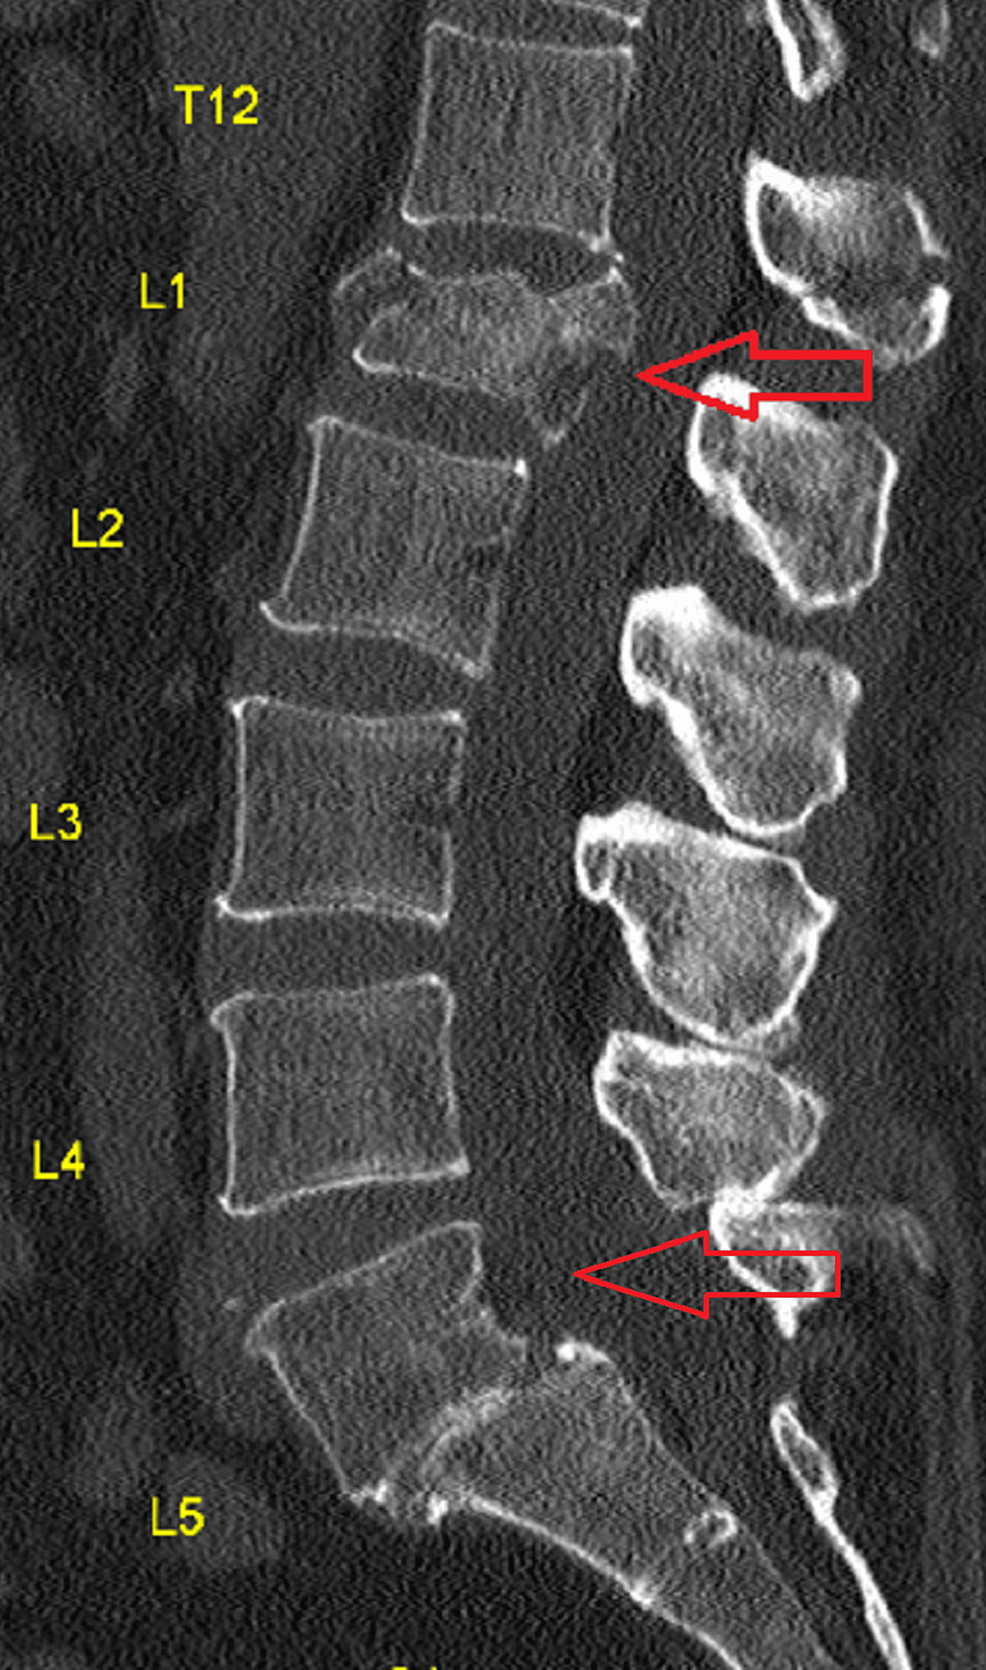 A Patient's Guide to Lumbar Compression Fracture